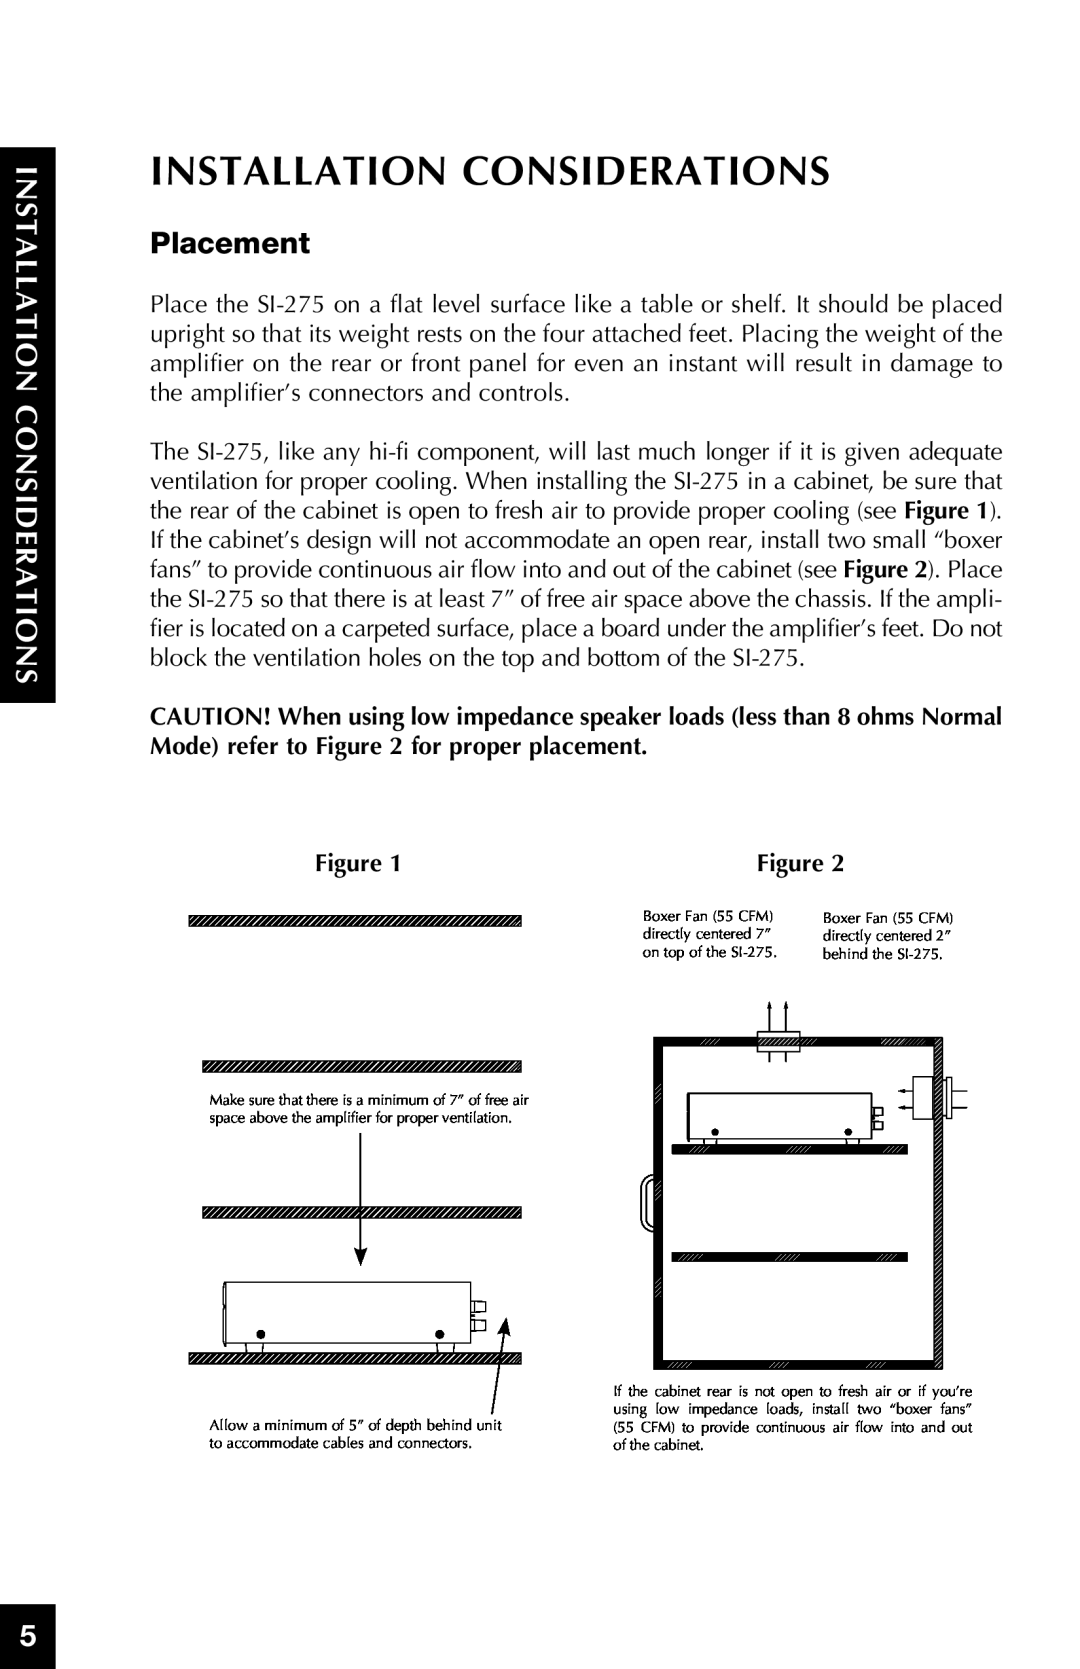 Niles Audio SI-275 manual Installation Considerations, Placement 